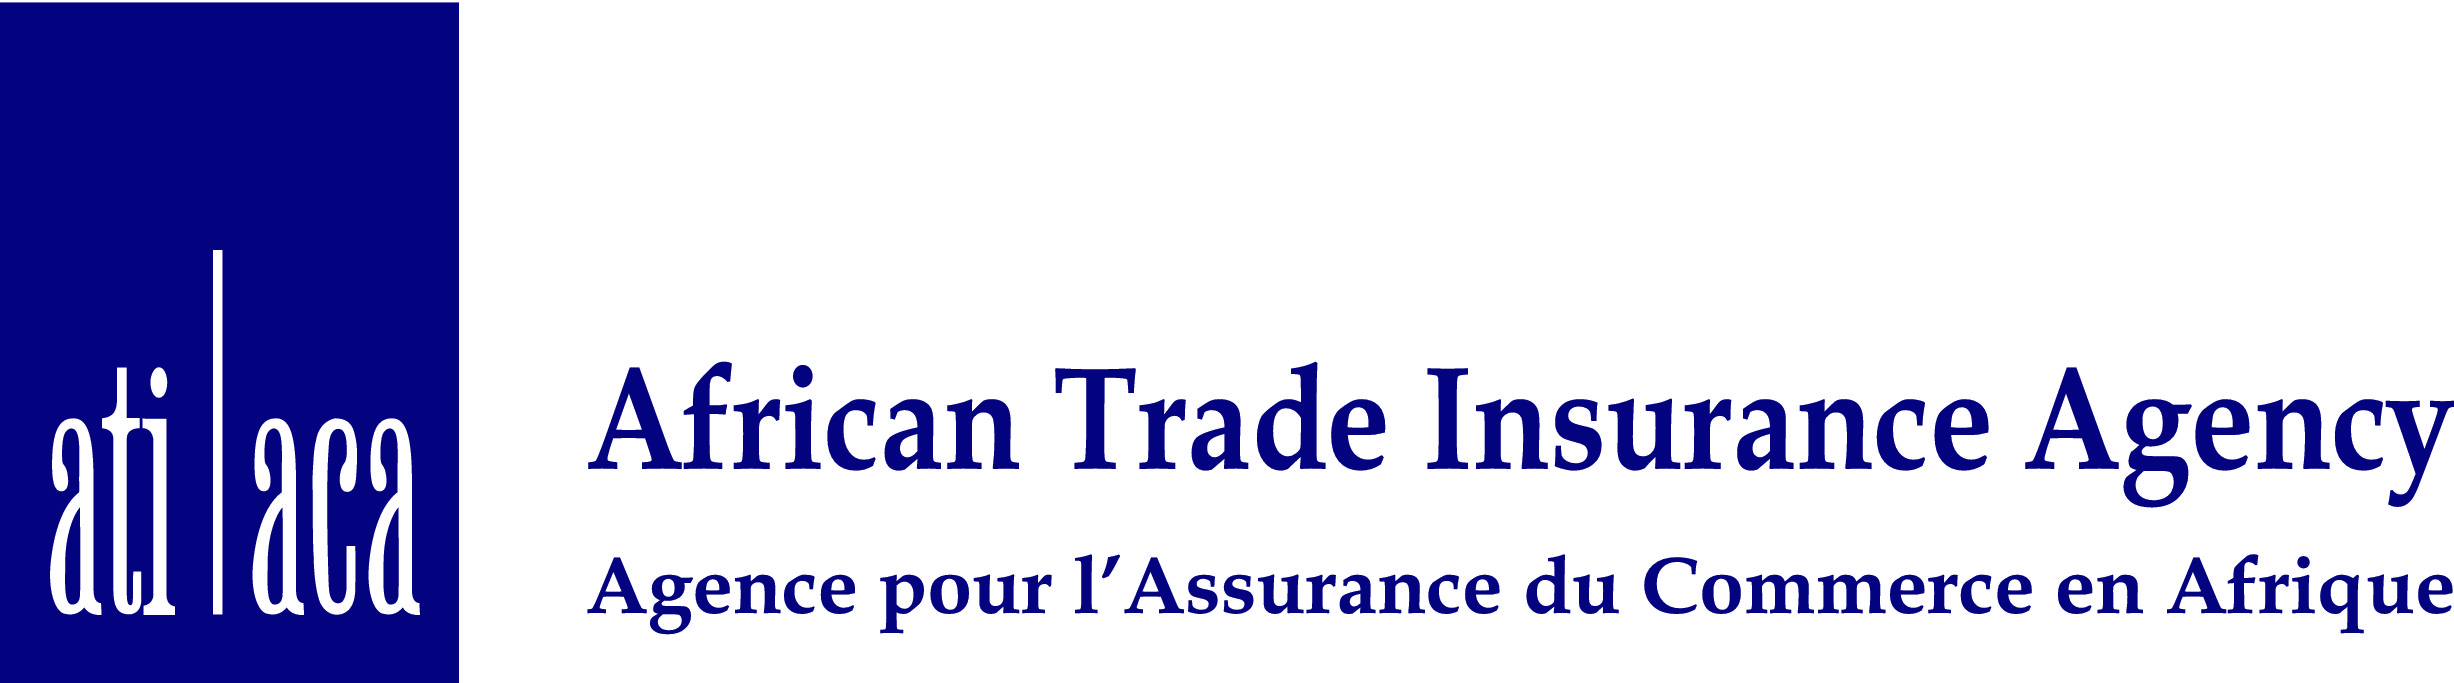 ATI - The African Trade Insurance Agency